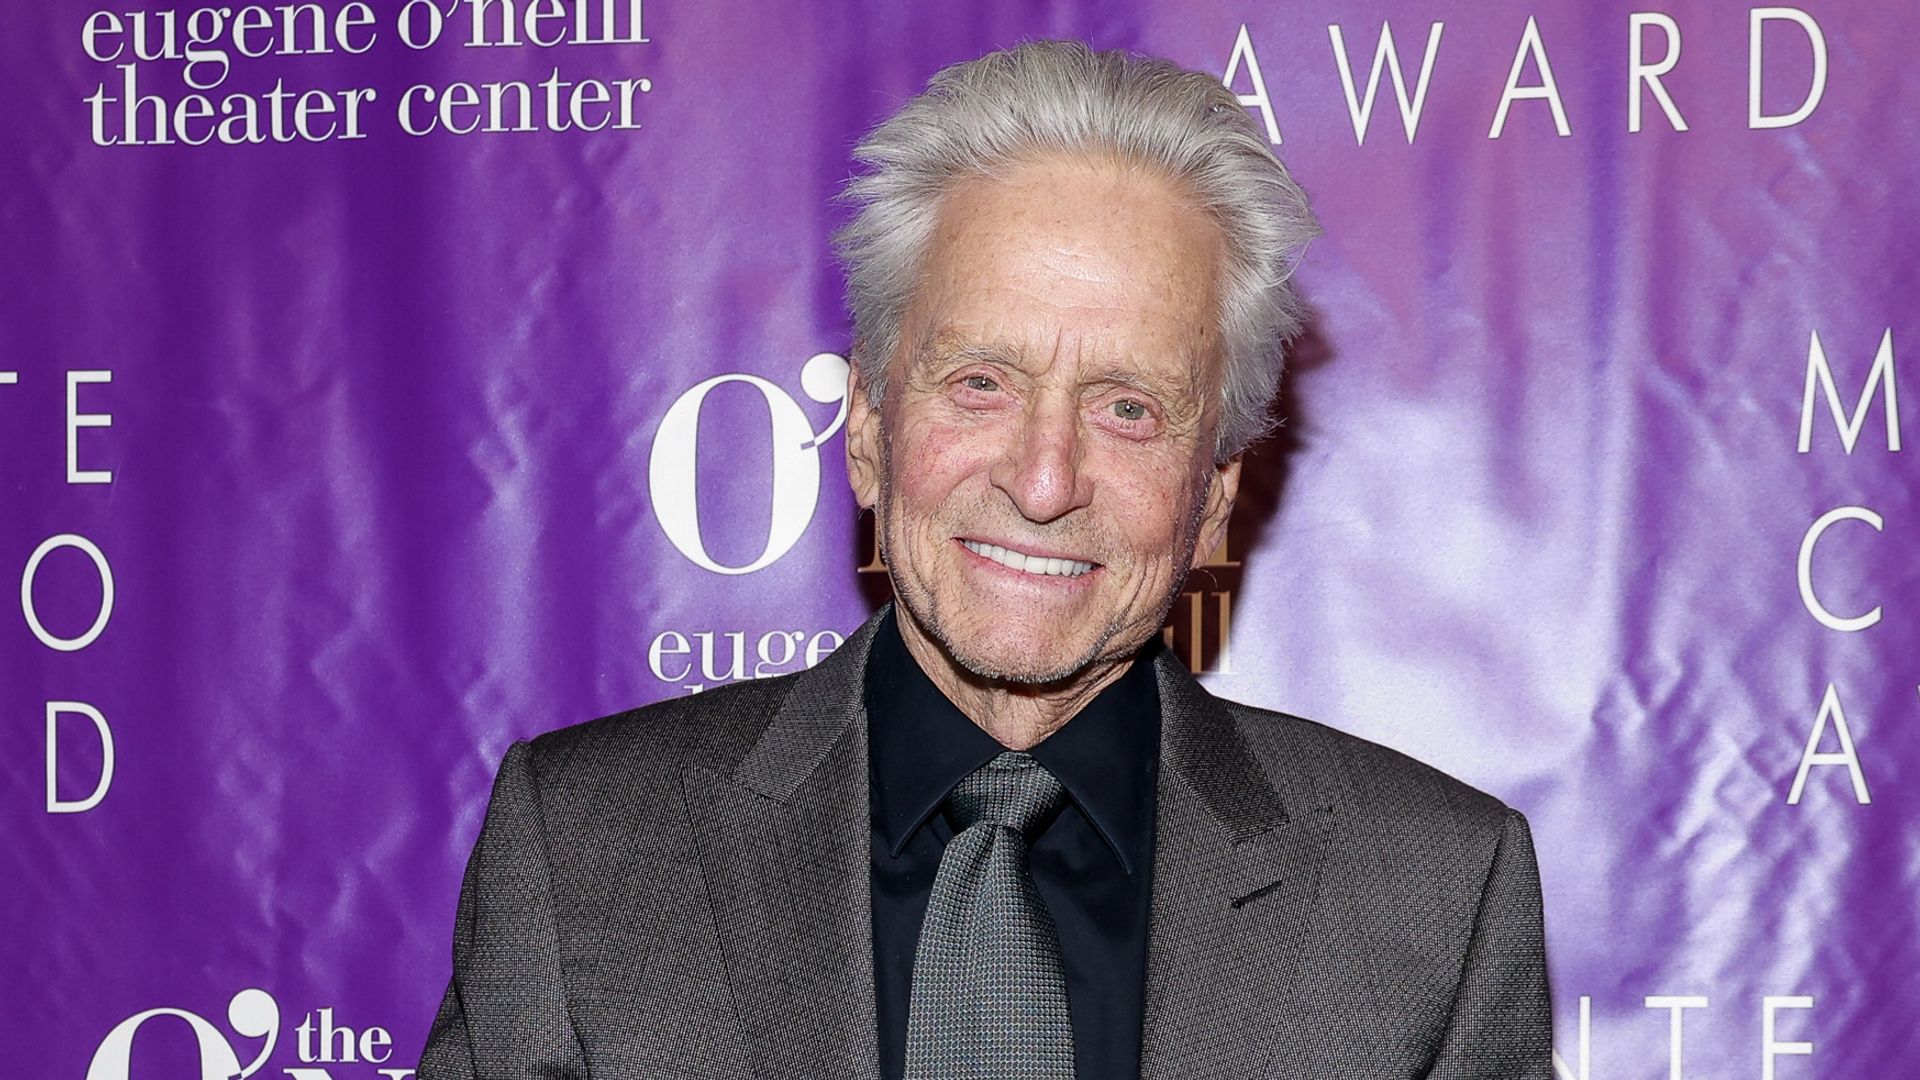 Michael Douglas attends the 22nd Monte Cristo award gala at Capitale on November 06, 2023 in New York City.